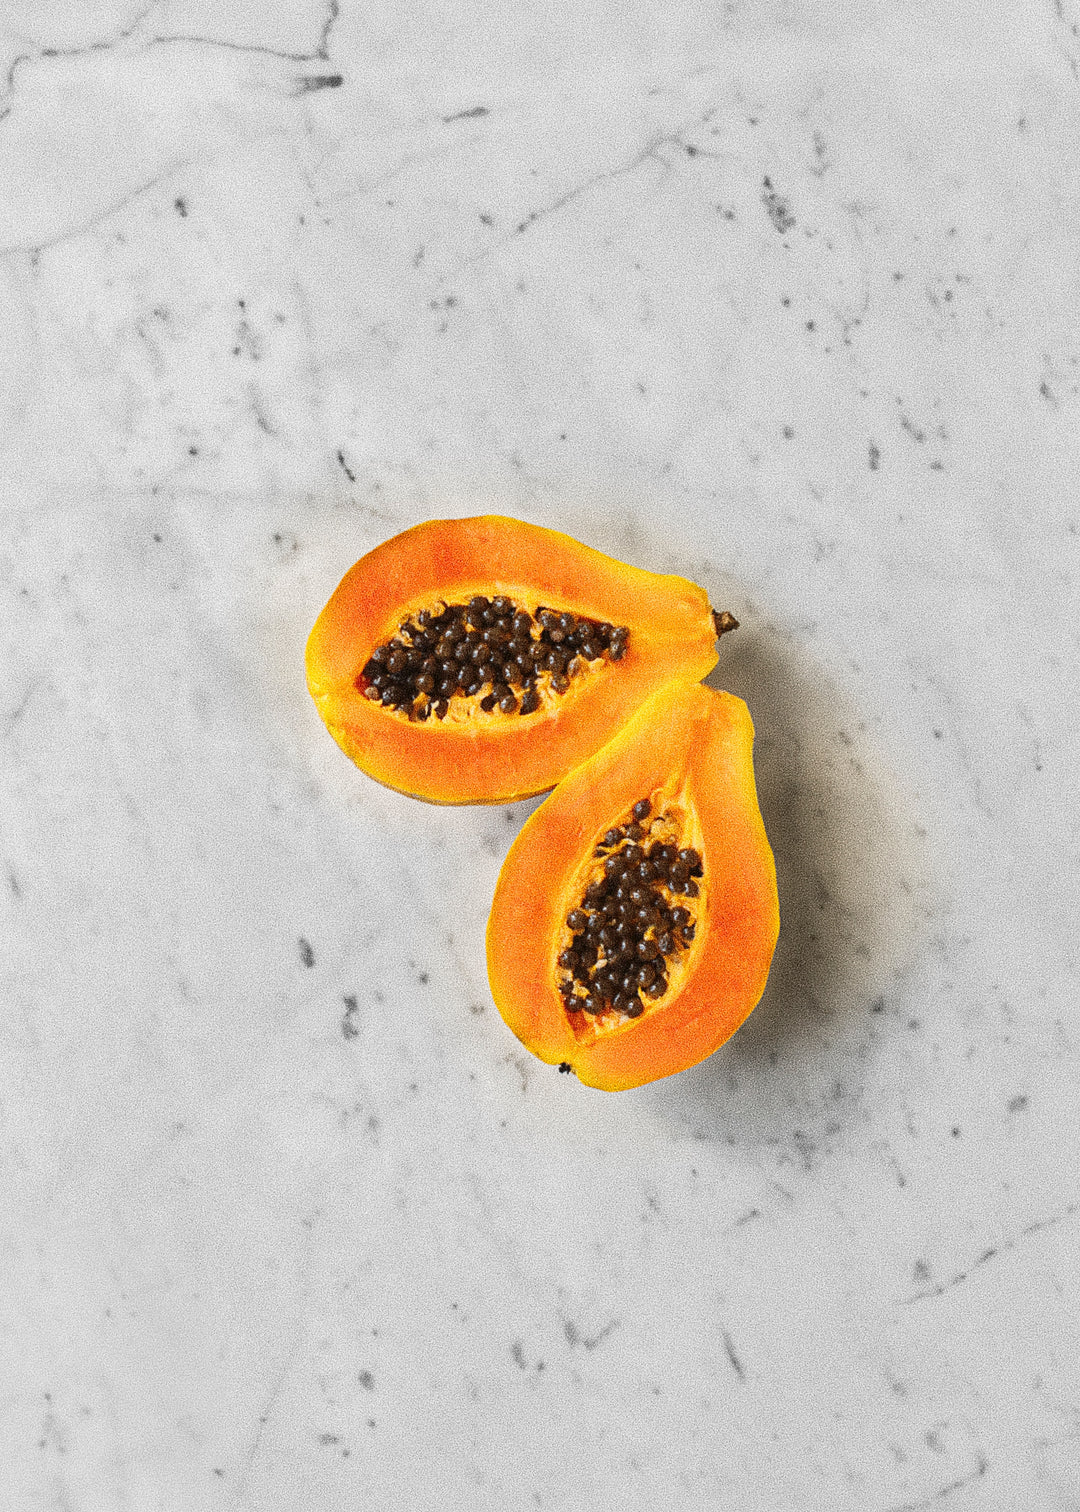 Papaya enzymes: The best way to gently exfoliate